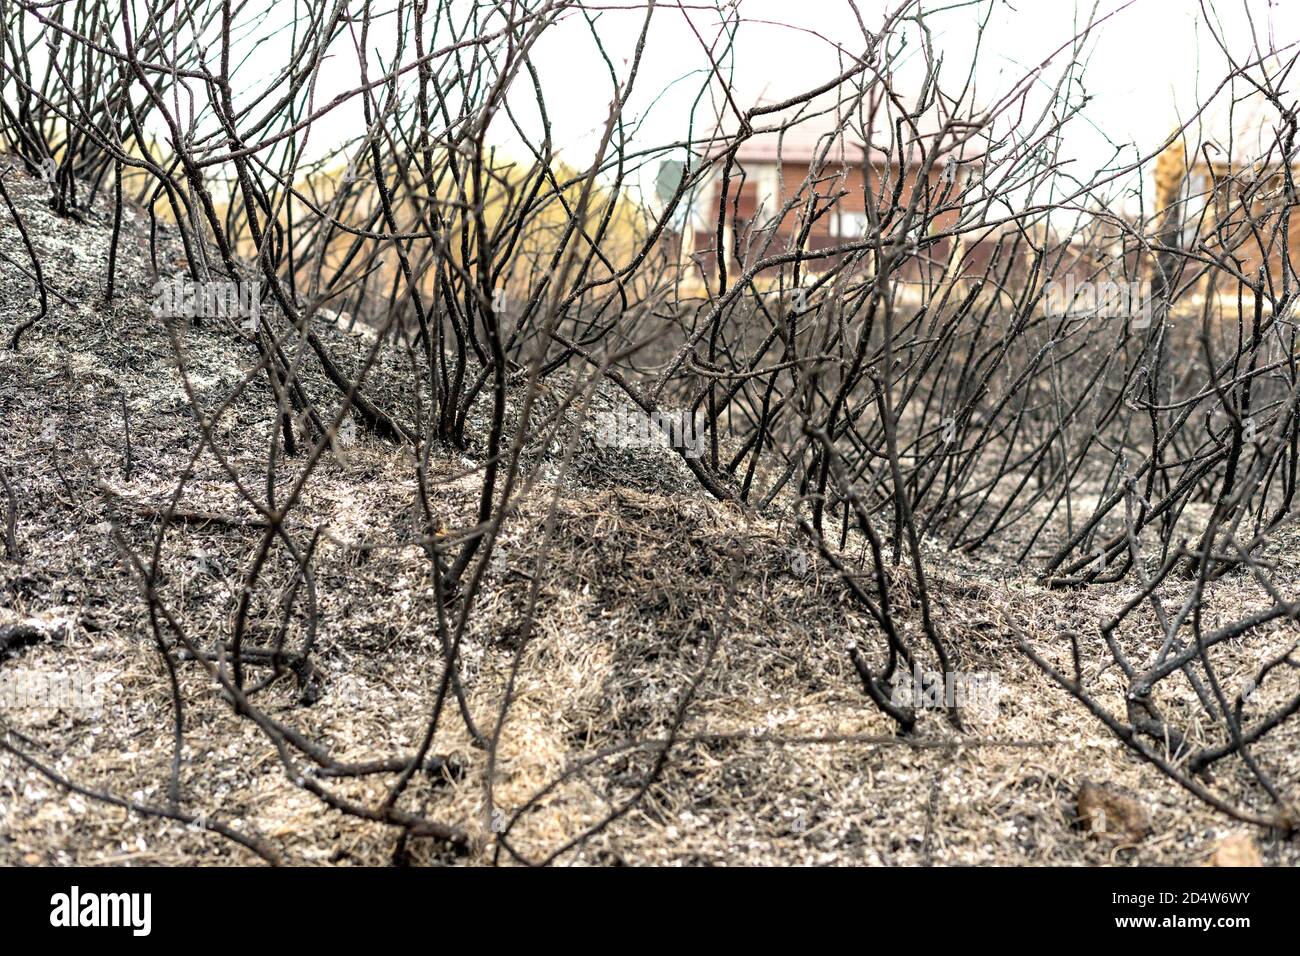 A burnt-out, charred garden as a result of the actions of an irresponsible person. As a result of careless handling of fire. Stock Photo